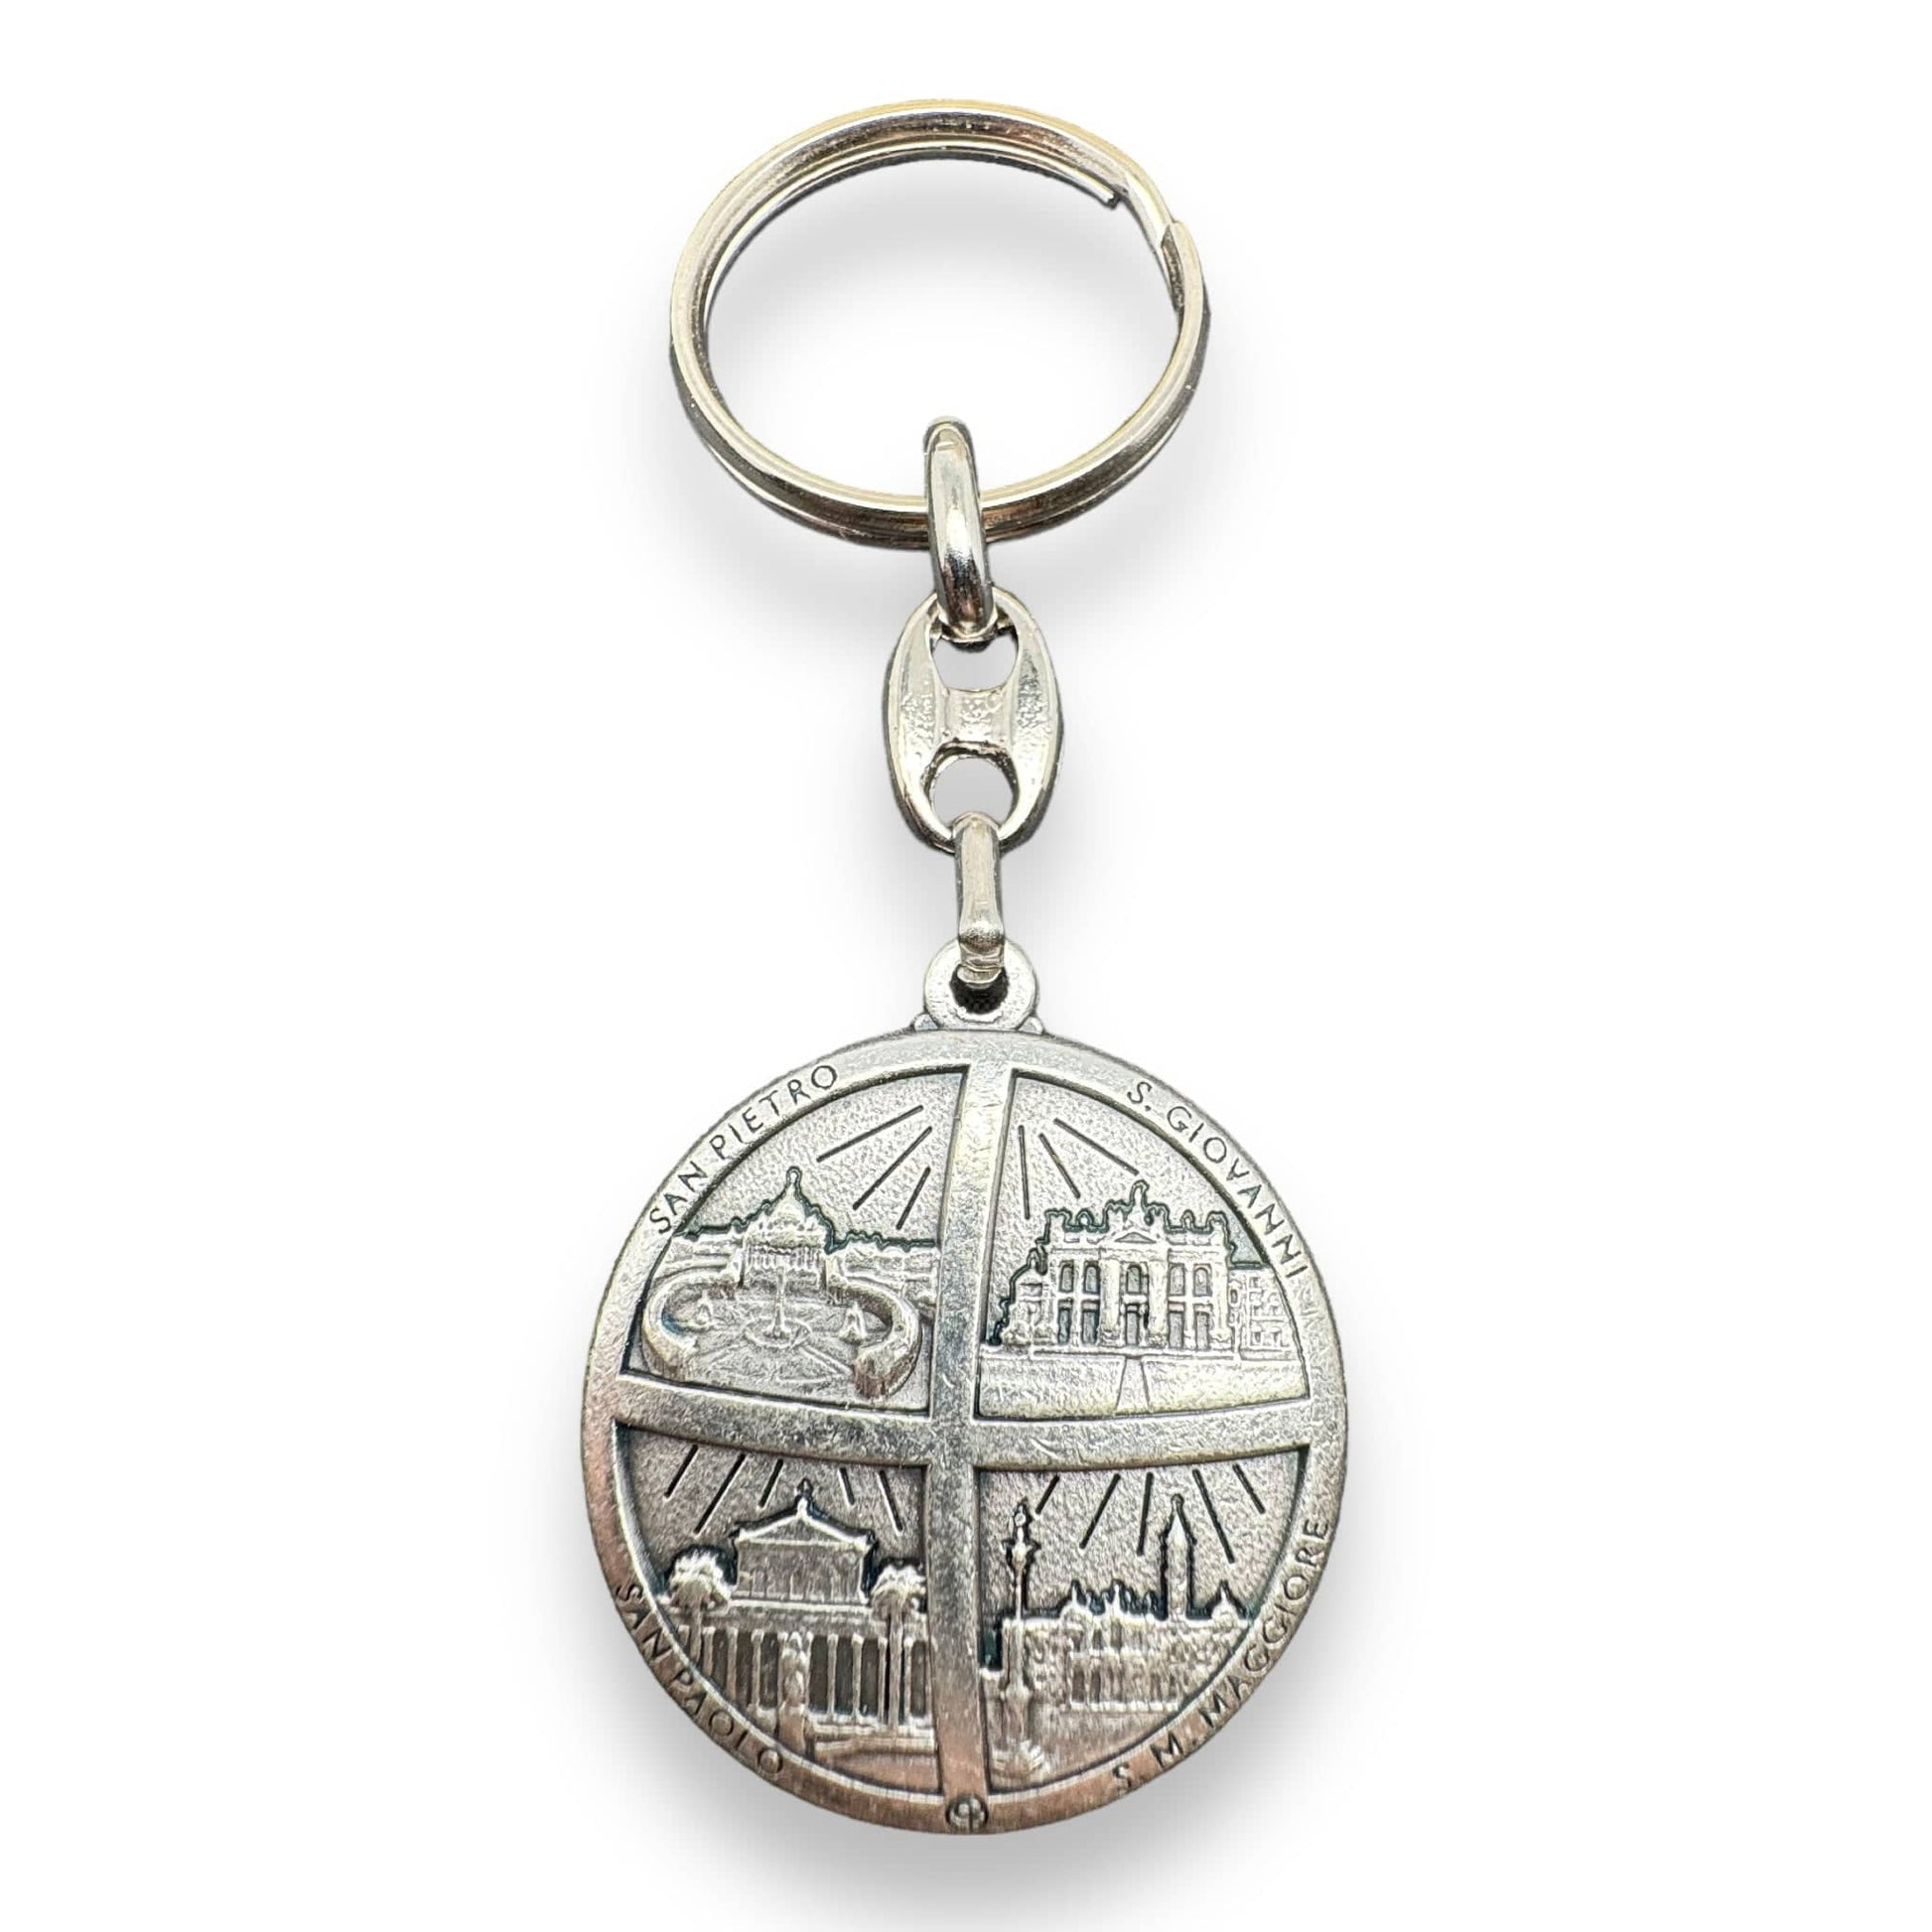 Catholically Keyring Blessed By Pope - Nice Pope Francis Key Ring - Key Chain St. Peter'S Square